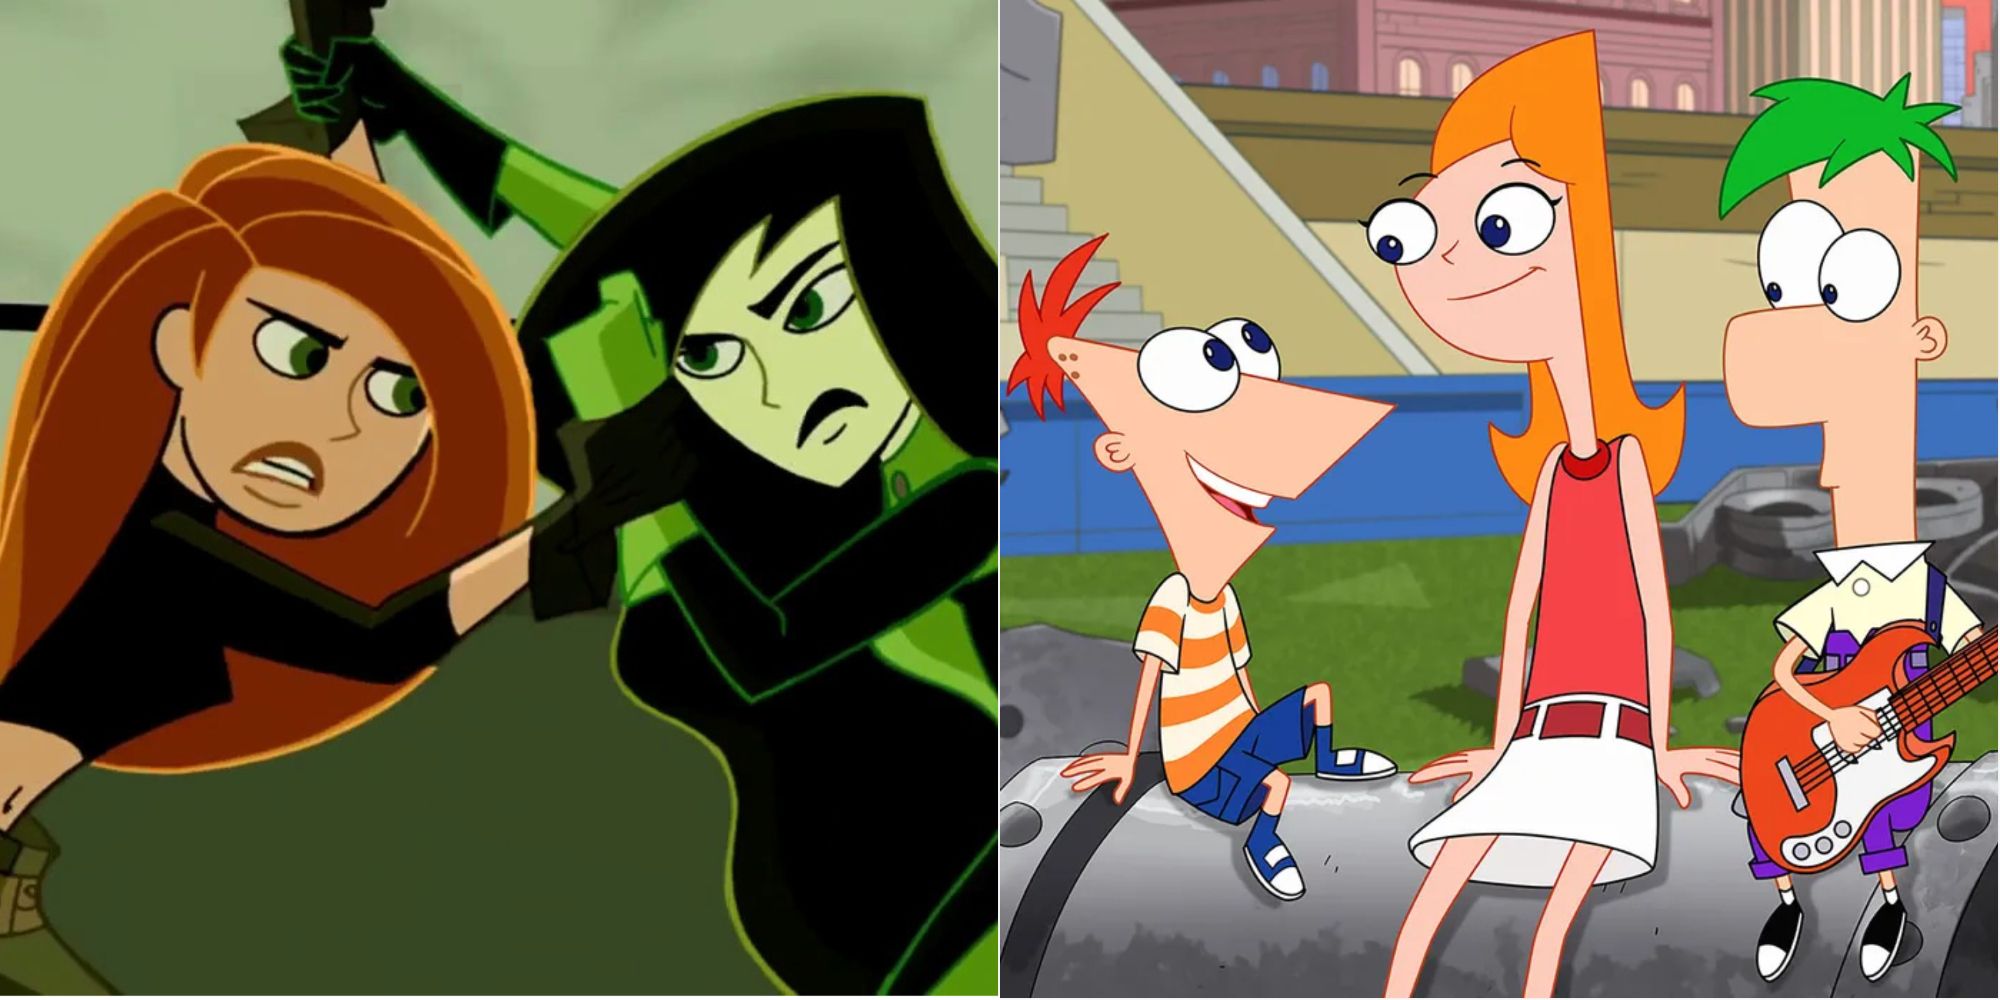 10 Best Disney Channel Cartoons Ever Made, According to Ranker